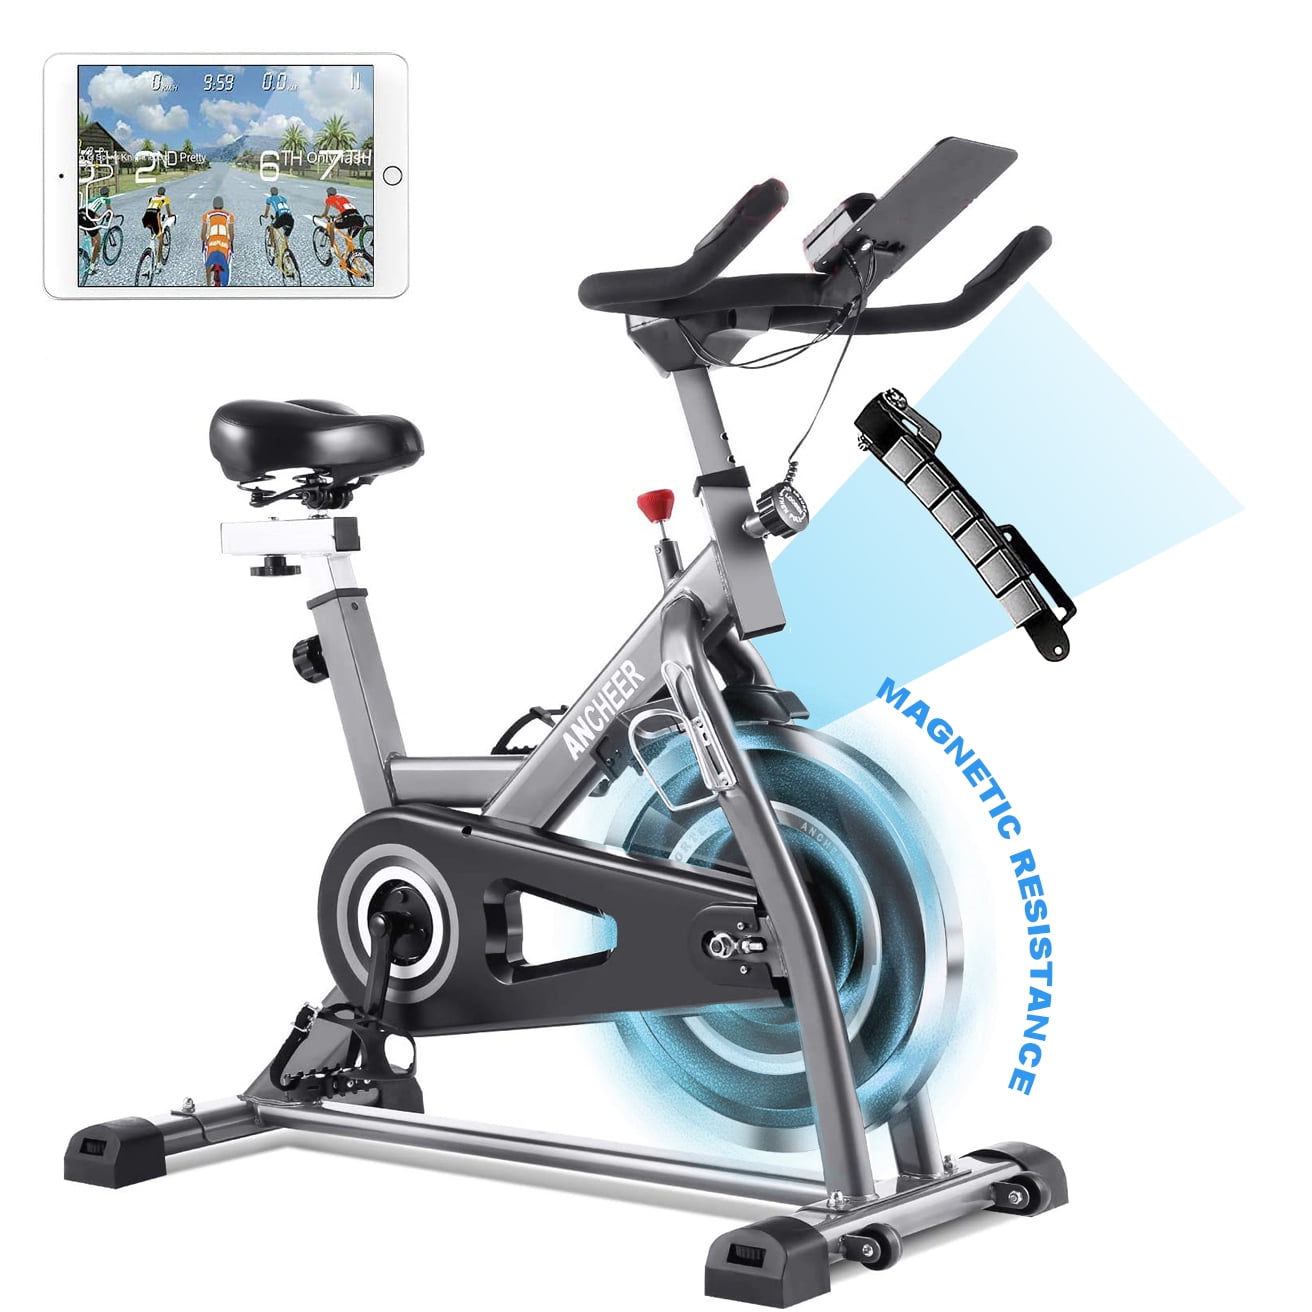 Details about   Exercise Stationary Bike Bicycle Cycling Home Gym Cardio Workout Indoor Fitness 